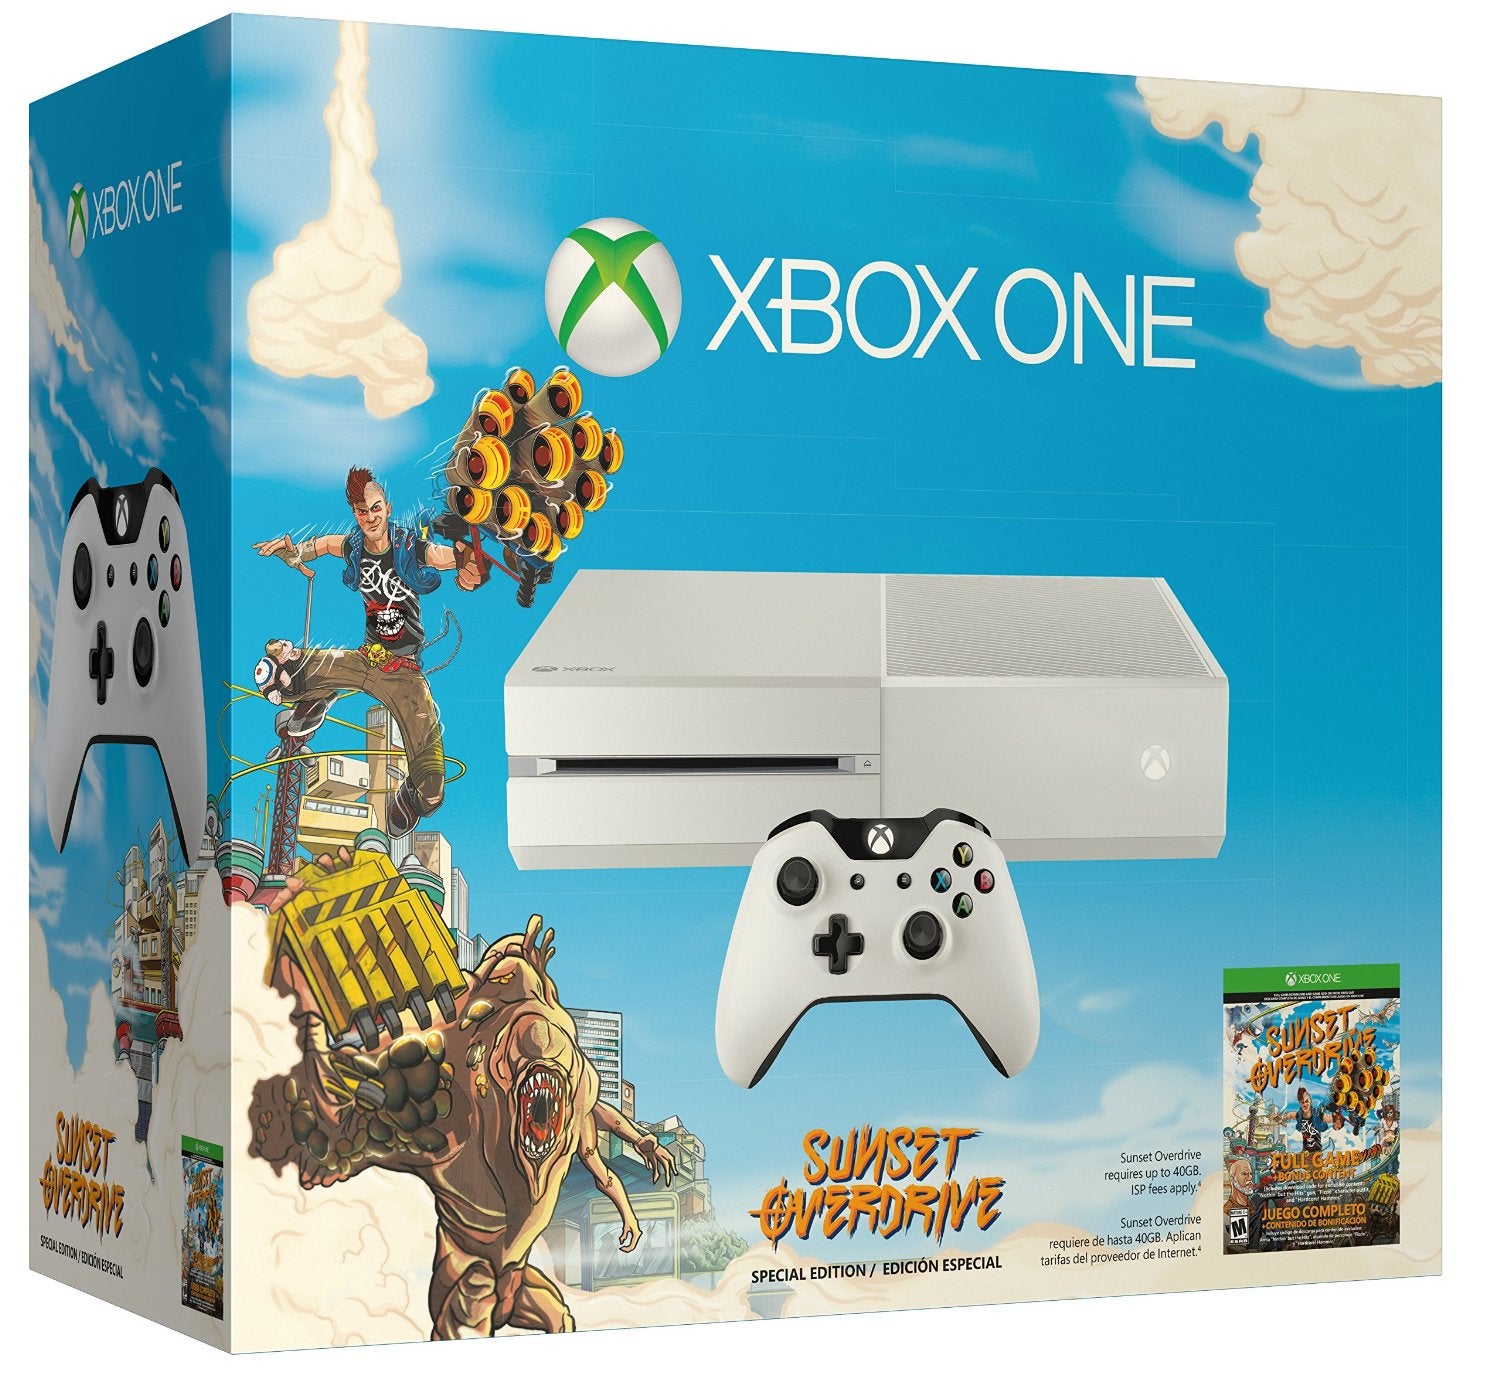 Image for You can now pre-order the white Xbox One Sunset Overdrive bundle for £309